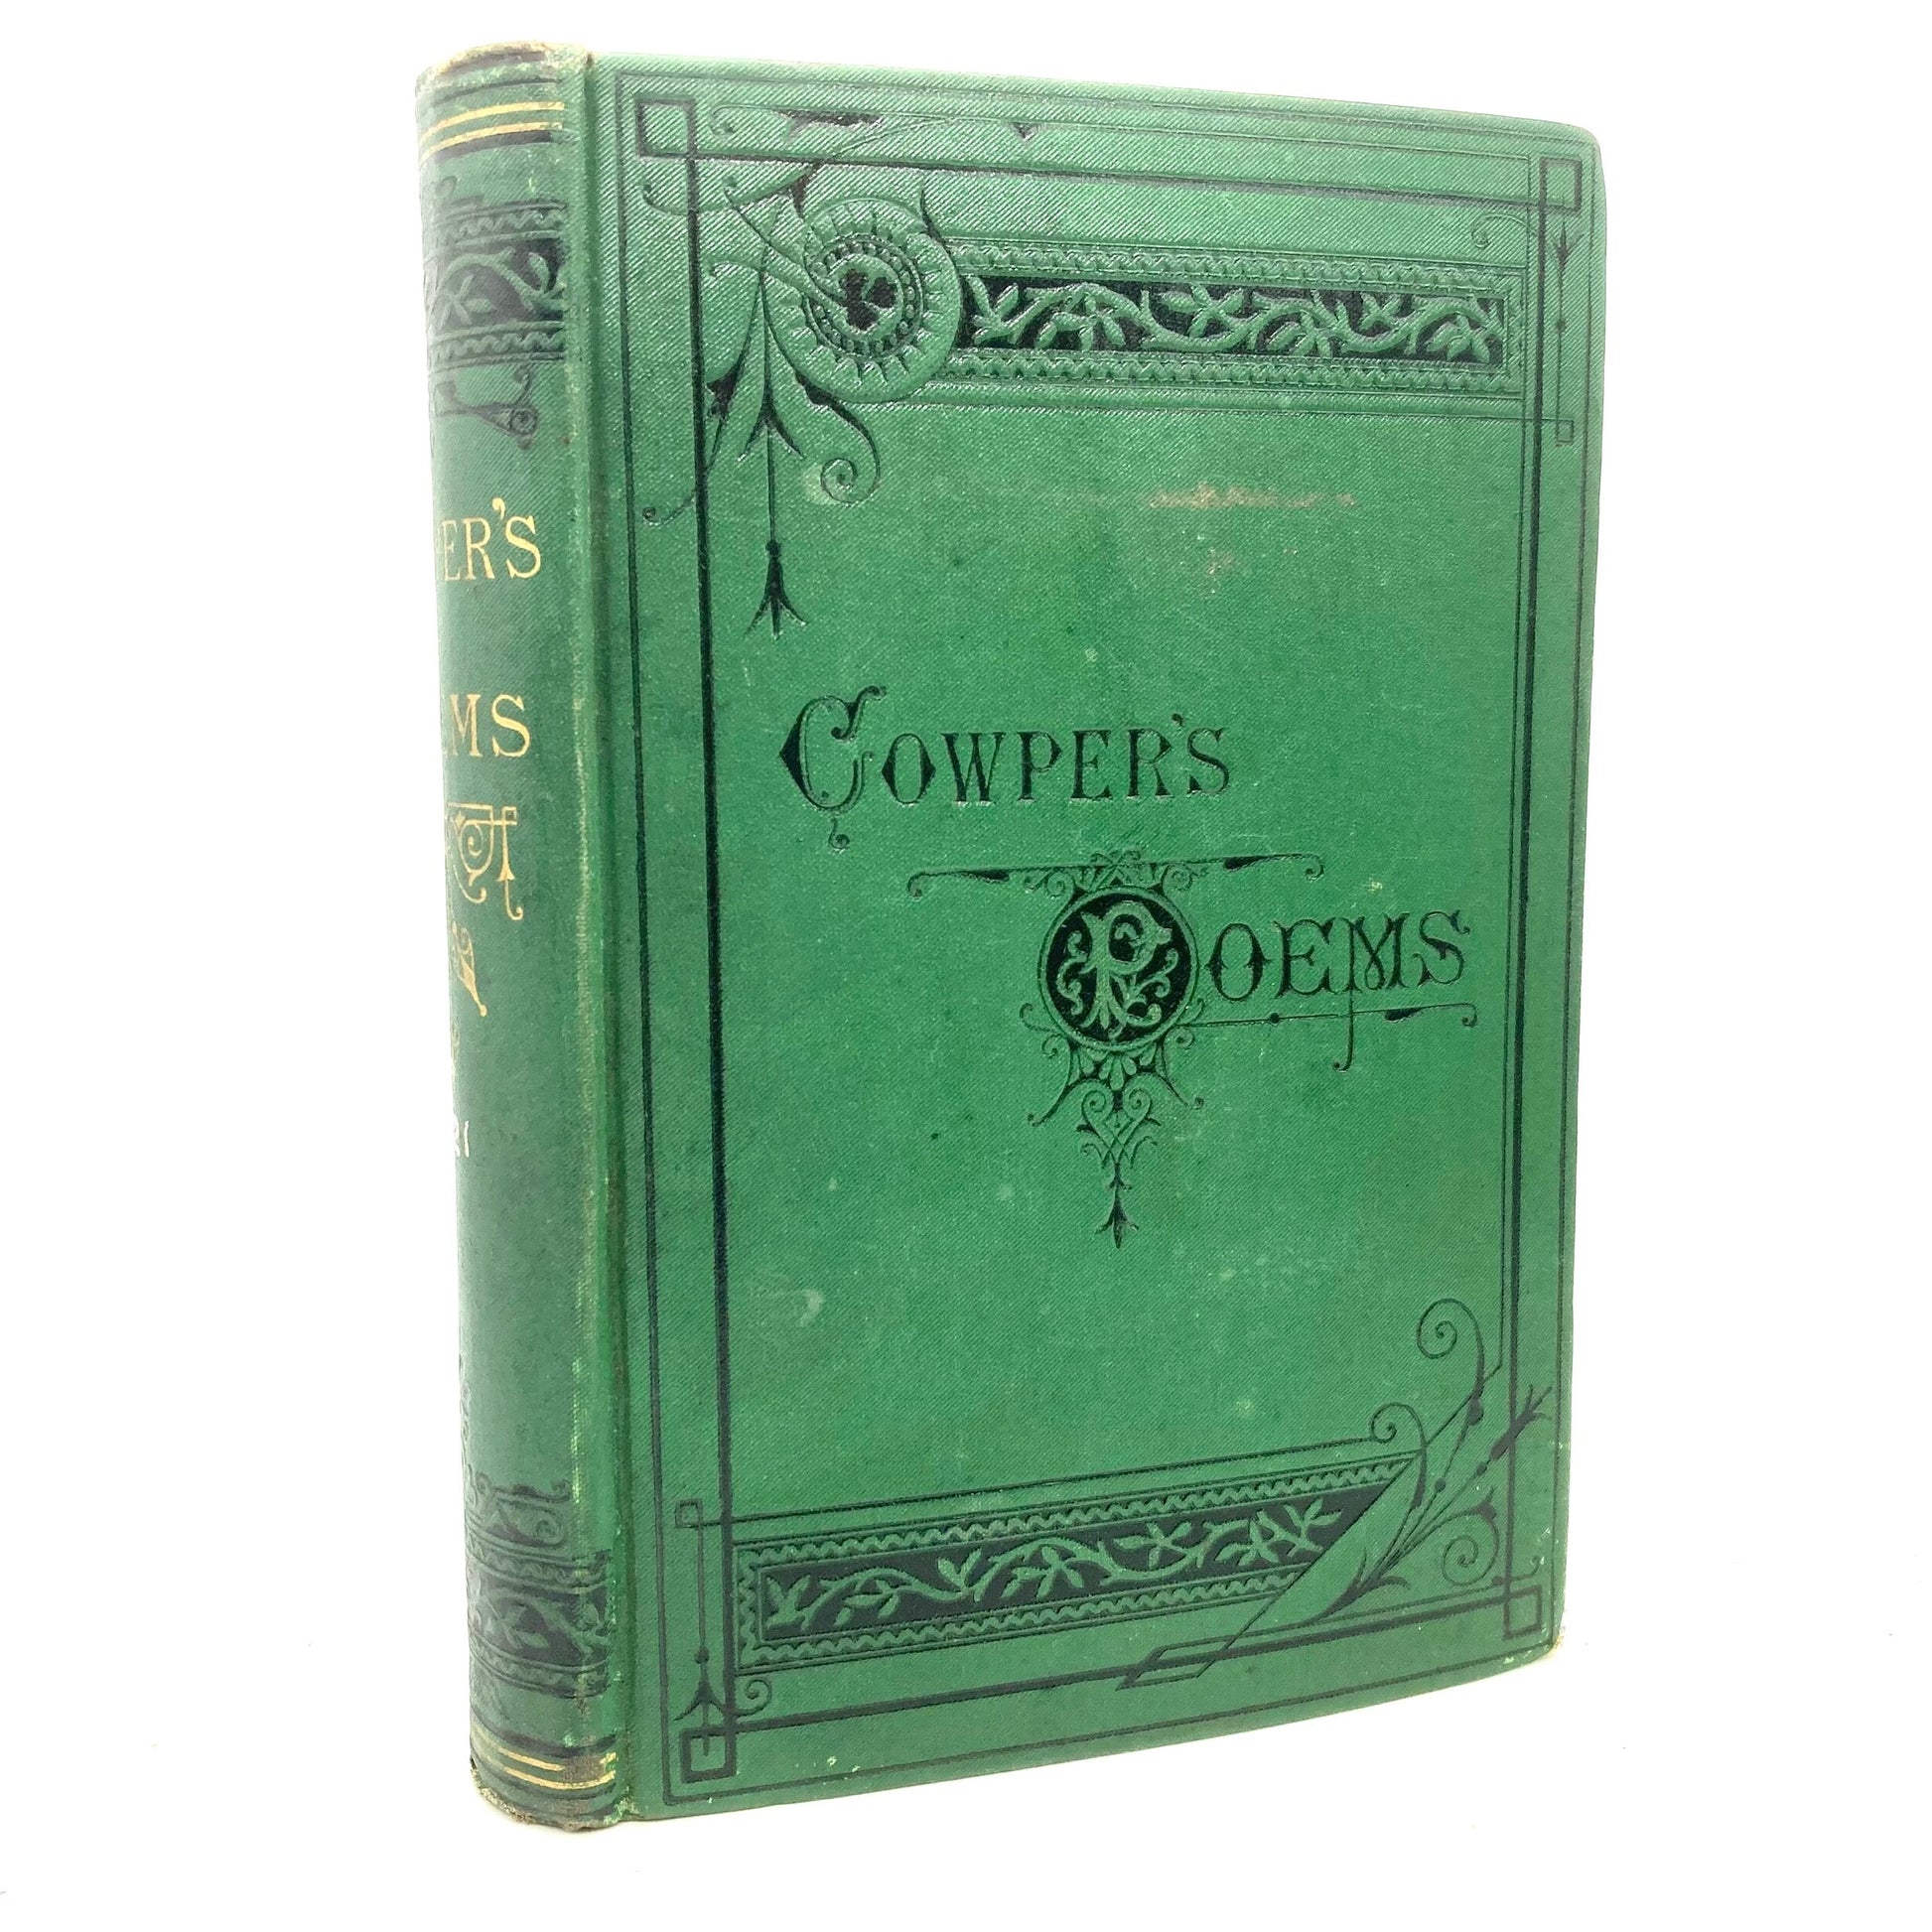 COWPER, William "The Poetical Works of William Cowper" [Thomas Crowell, c1881] - Buzz Bookstore